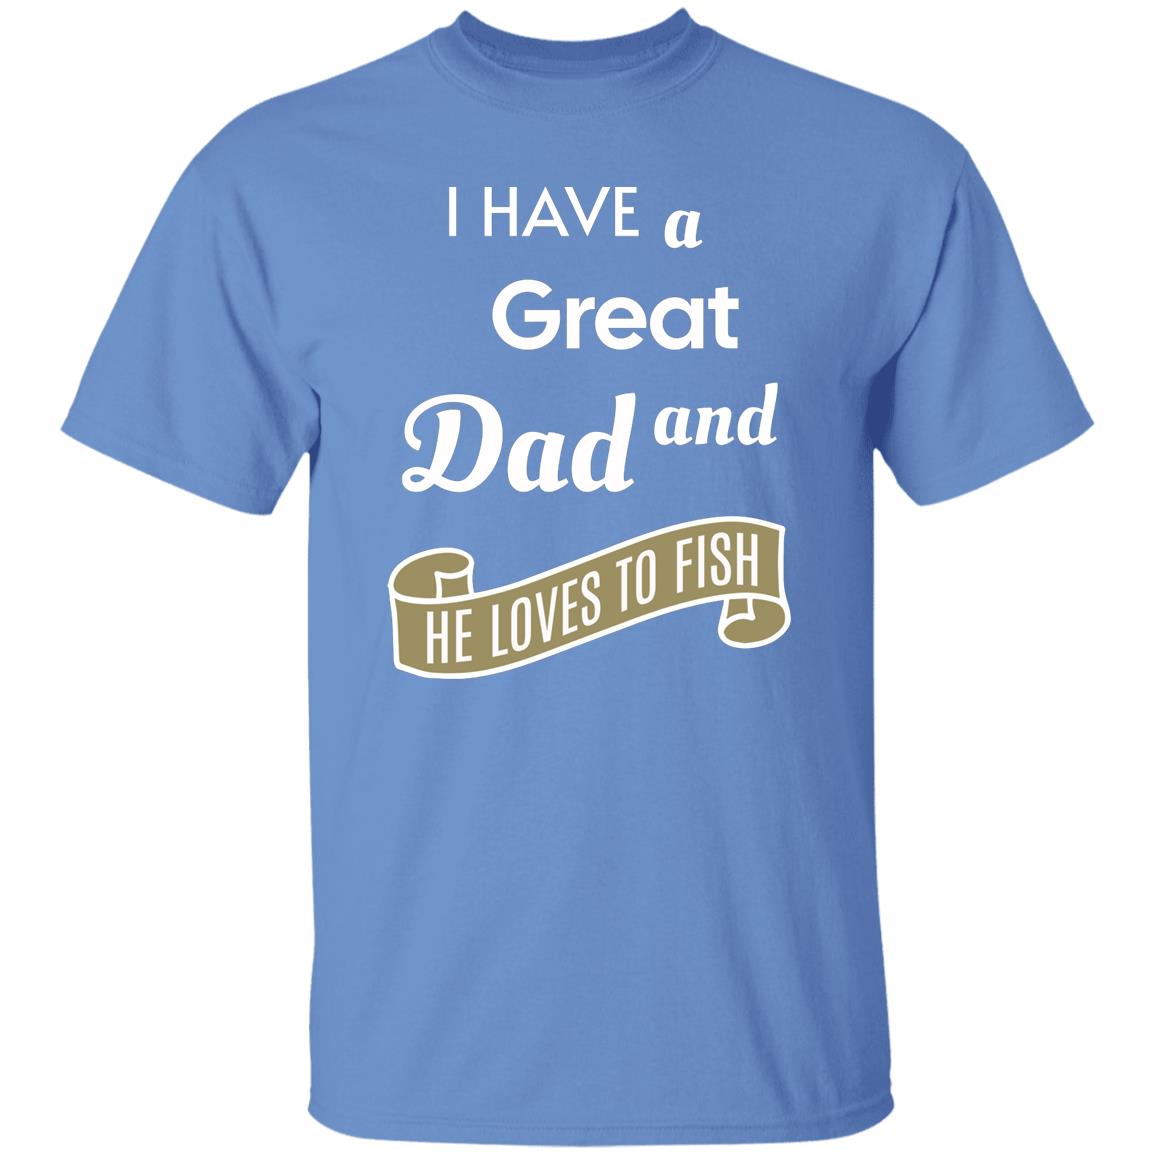 I have a great dad and he loves fishing k t-shirt carolina-blue